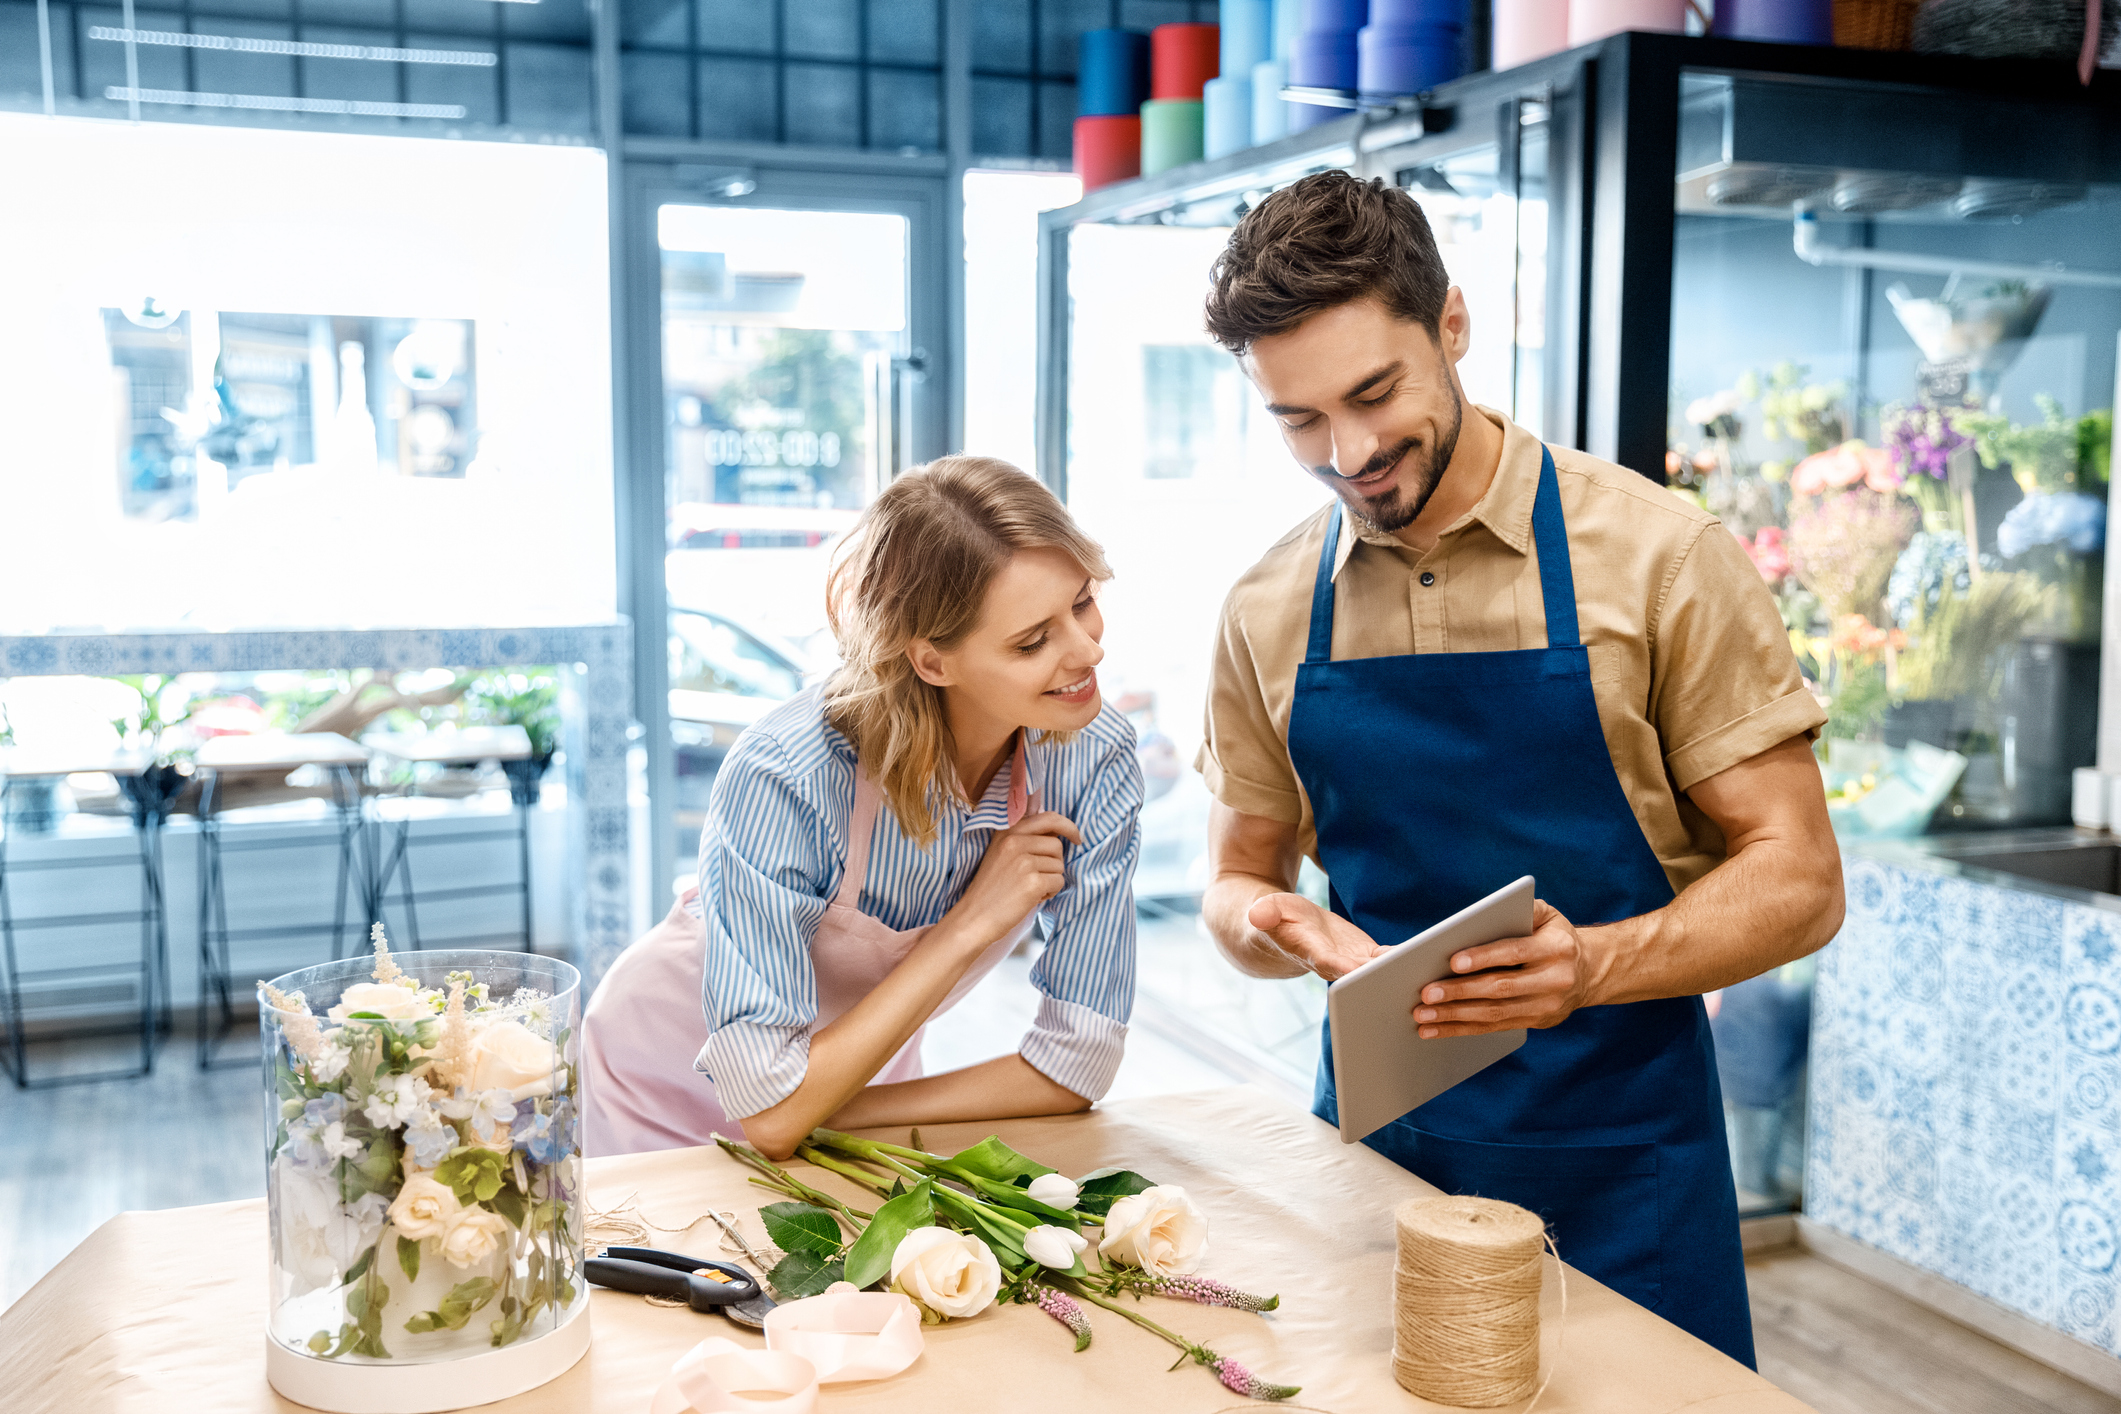 A male and a female business owners stood in a shop looking at a tablet device. Both are wearing aprons and smiling